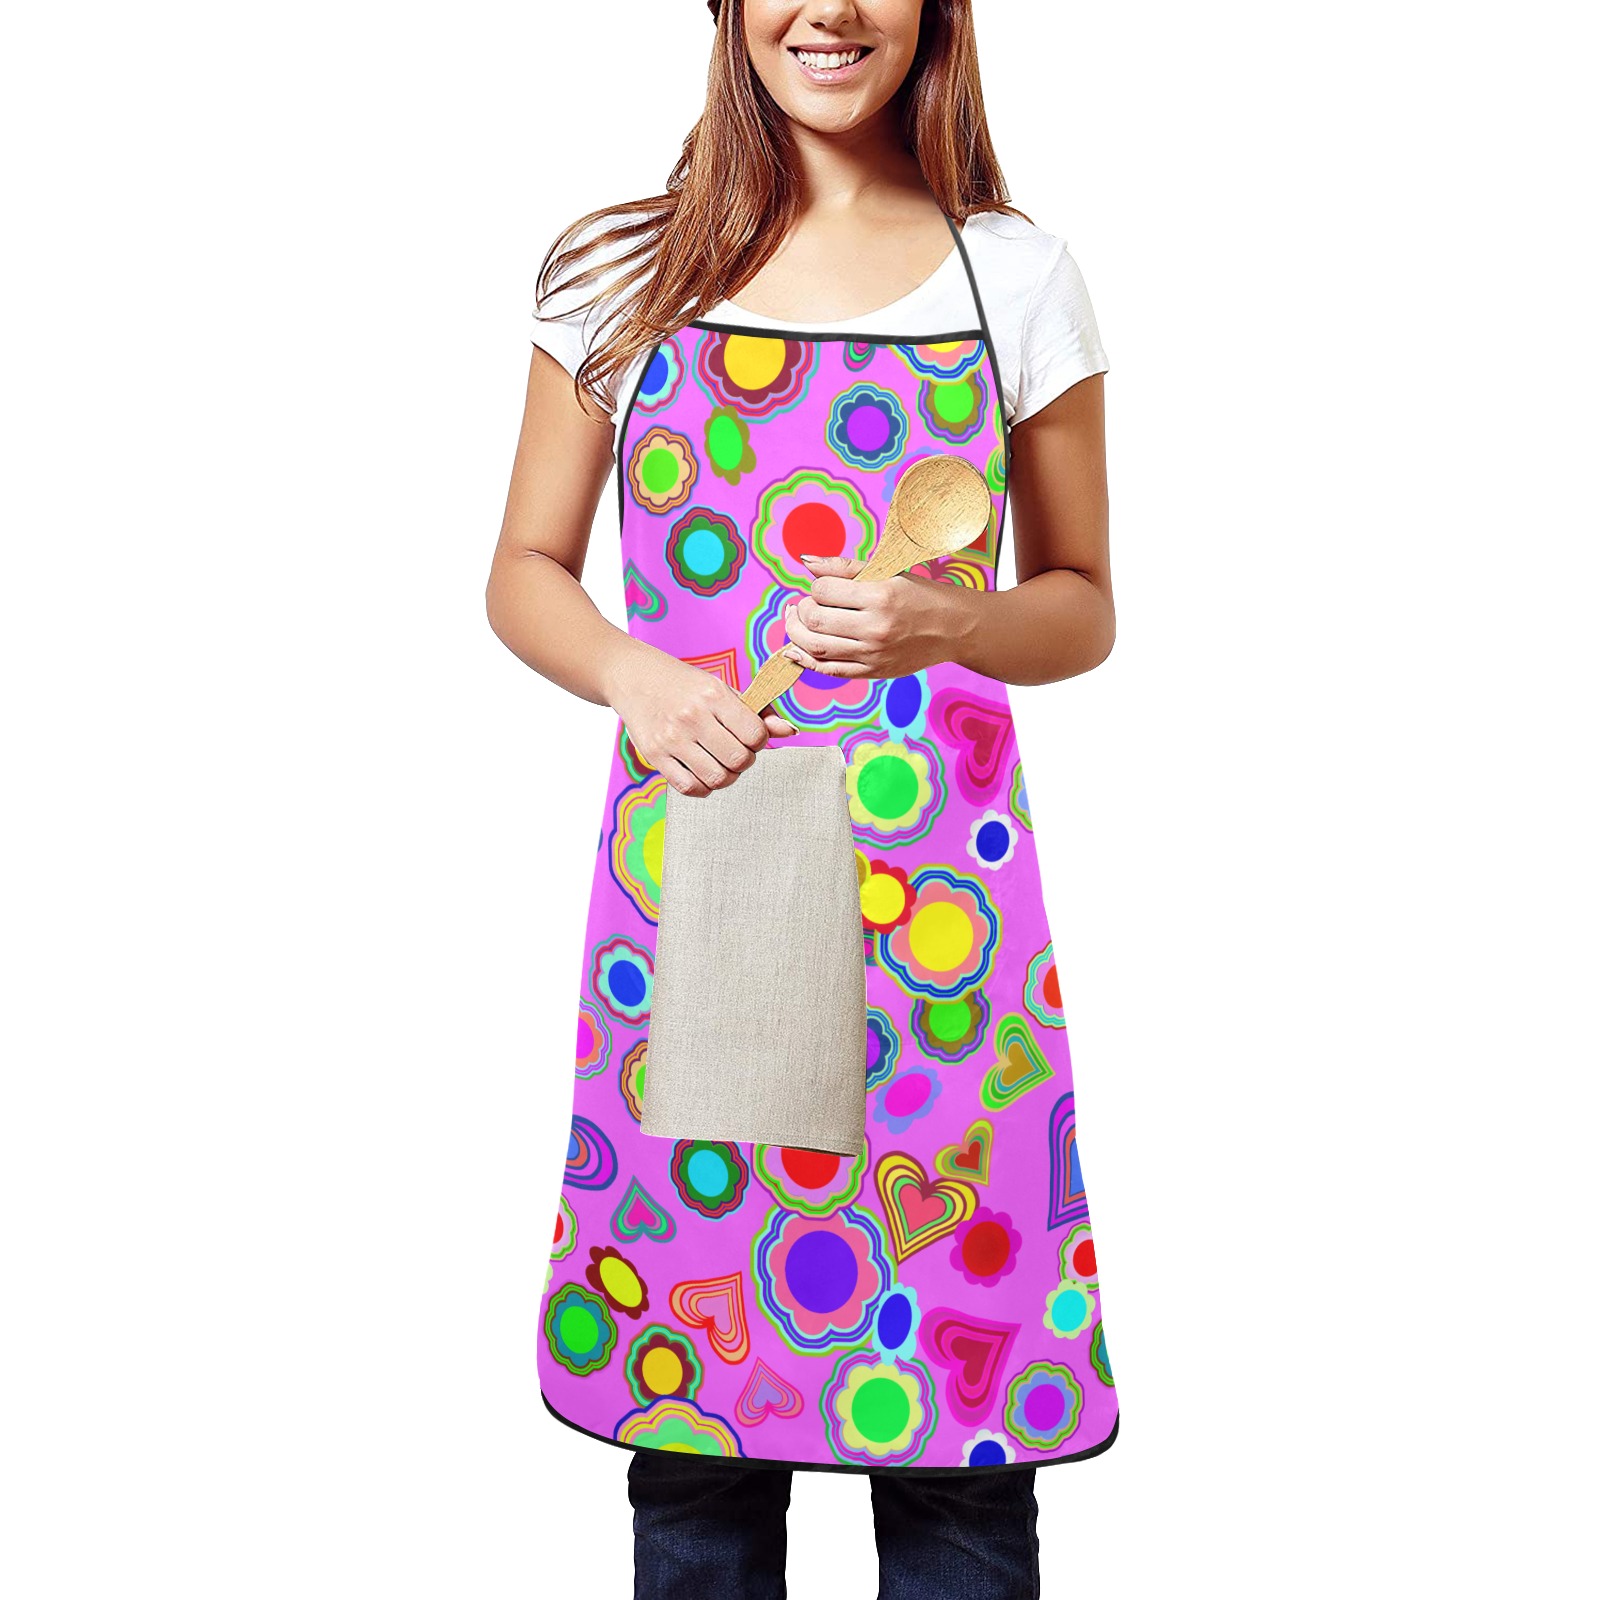 Groovy Hearts and Flowers Pink Women's Overlock Apron with Pocket